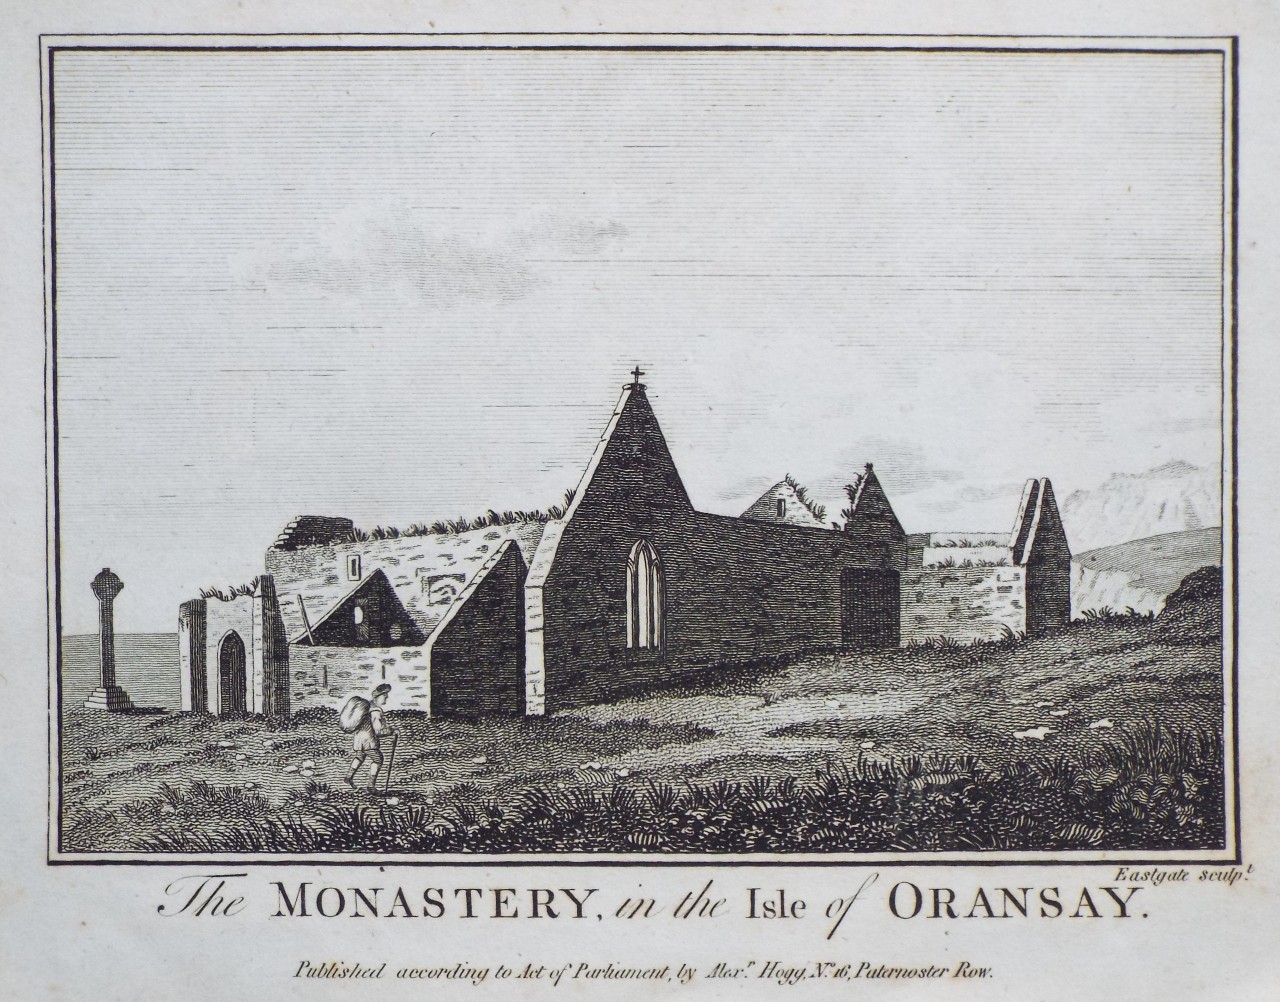 Print - The Monastery, in the Isle of Oransay. - 